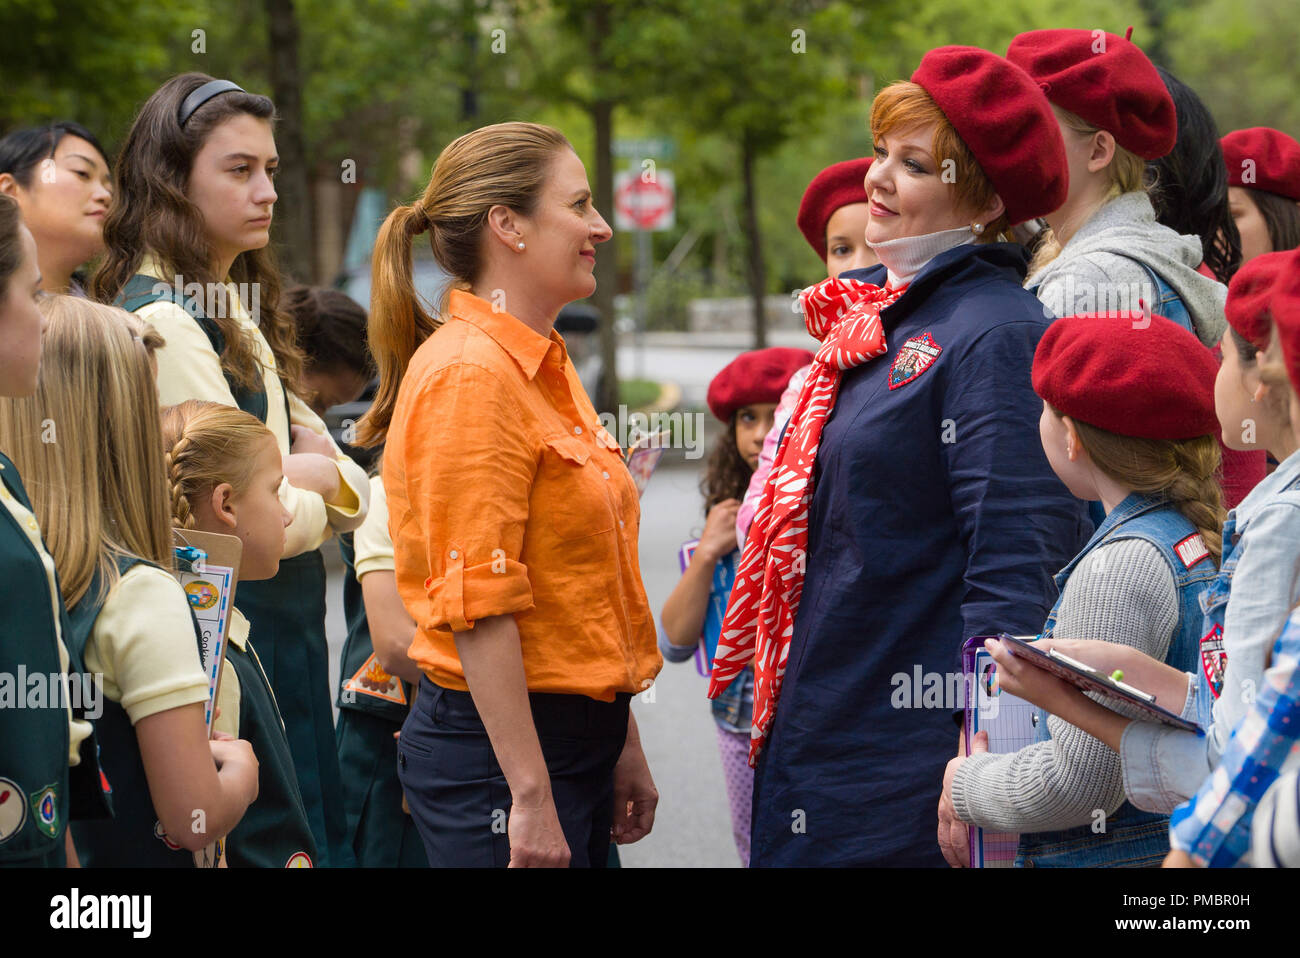 (Foreground, L to R) Helen (ANNIE MUMOLO) faces off with rival Michelle Darnell (MELISSA MCCARTHY) in 'The Boss.' Stock Photo